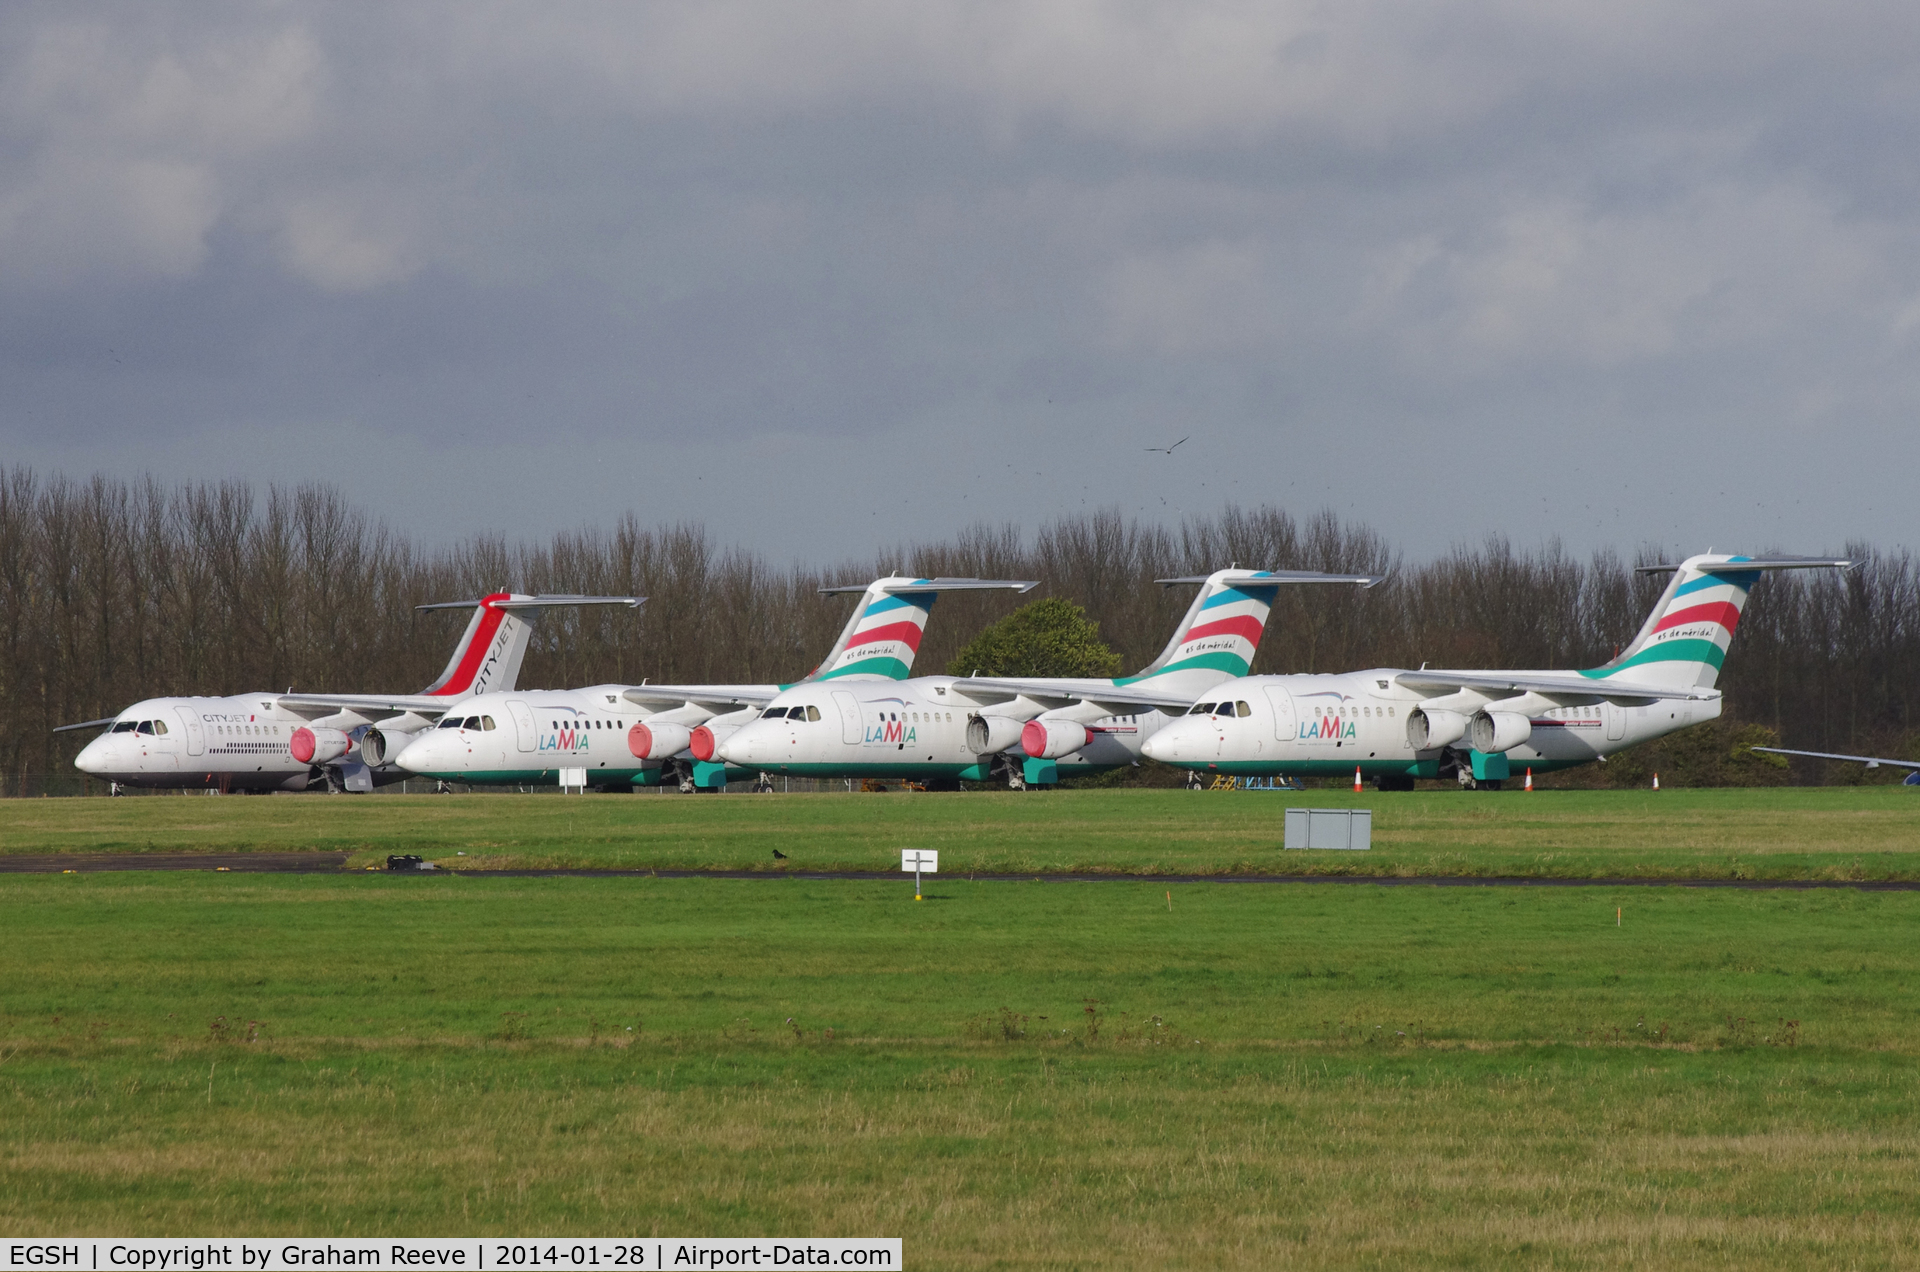 Norwich International Airport, Norwich, England United Kingdom (EGSH) - Some of the BAe 146/RJ's currently stored at Norwich.